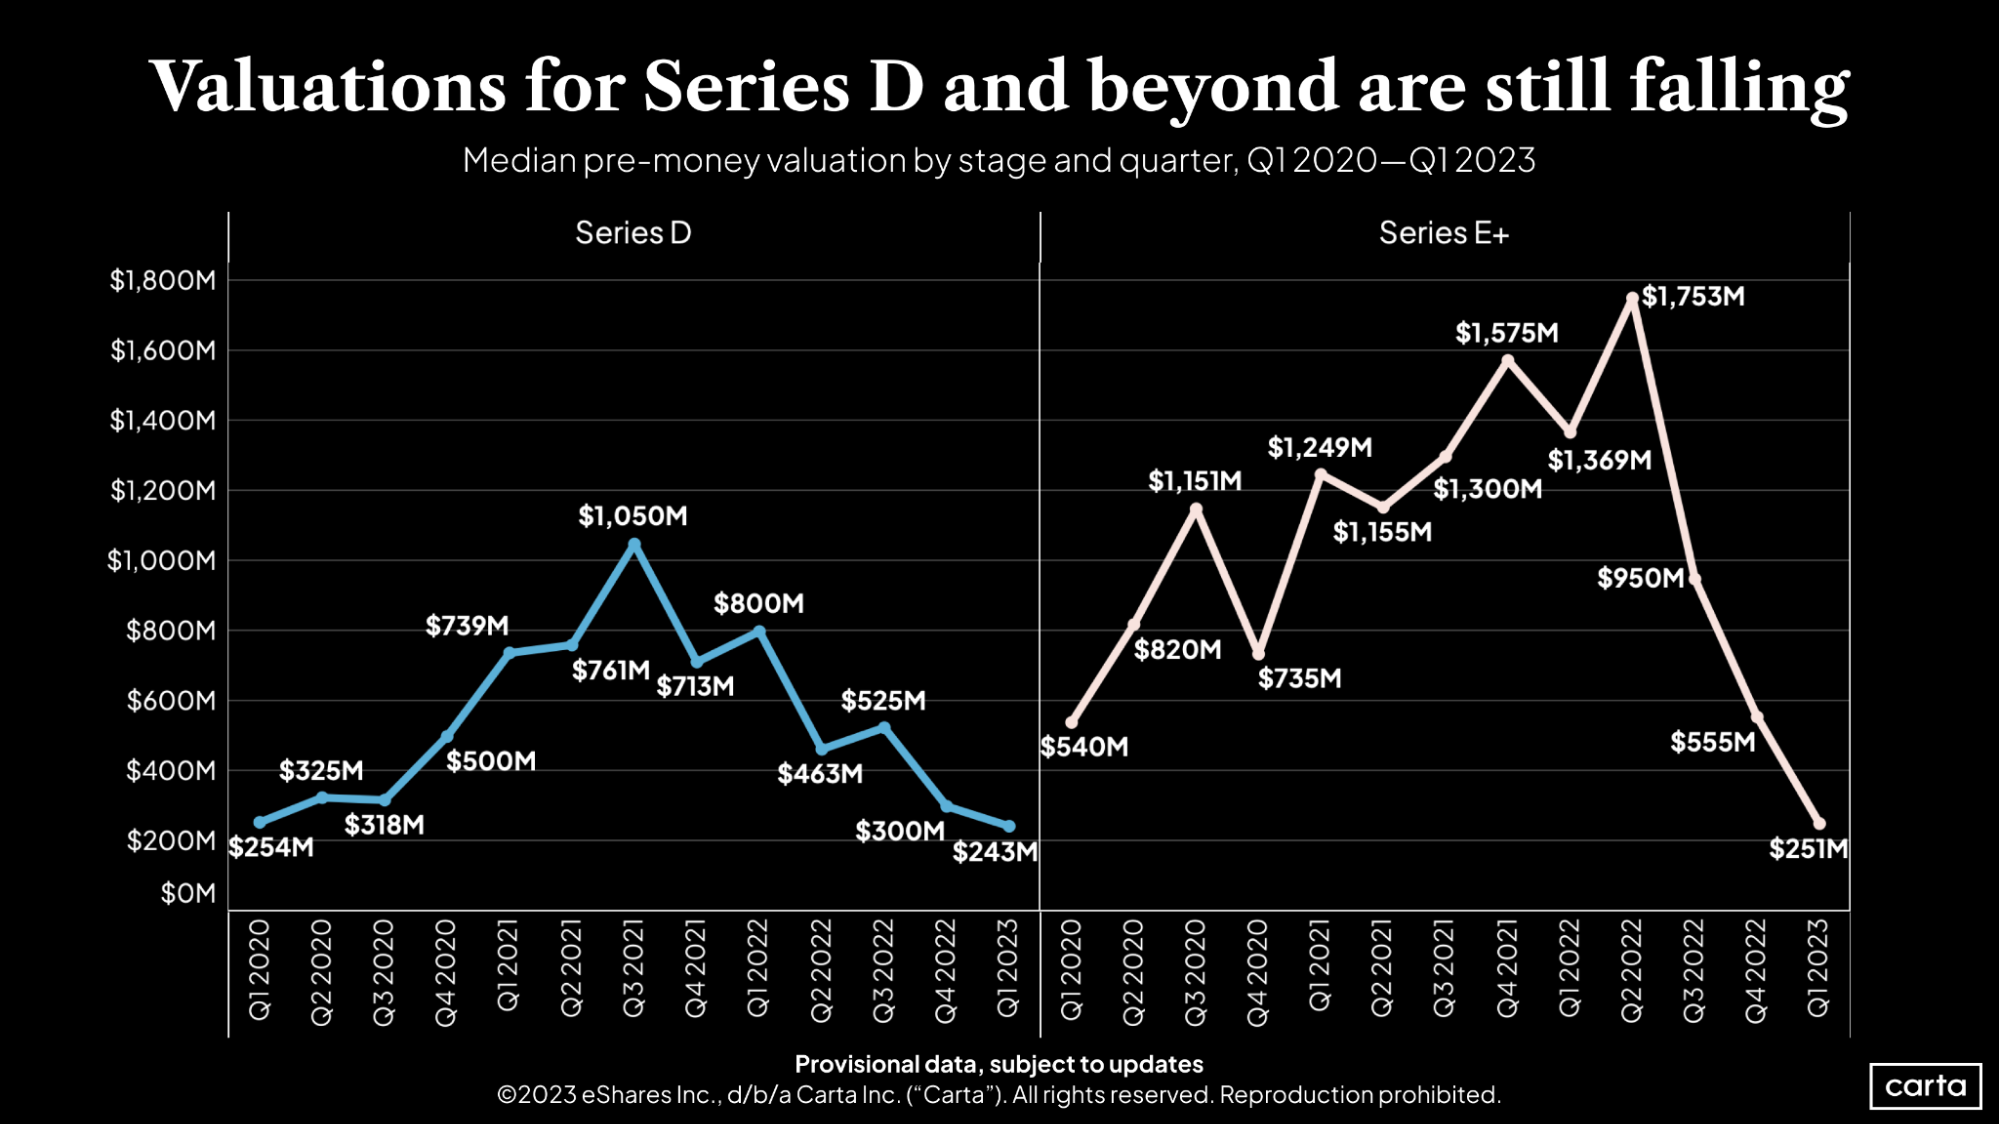 Series D and E+ median pre-money valuation by stage and quarter, Q12020-Q12023